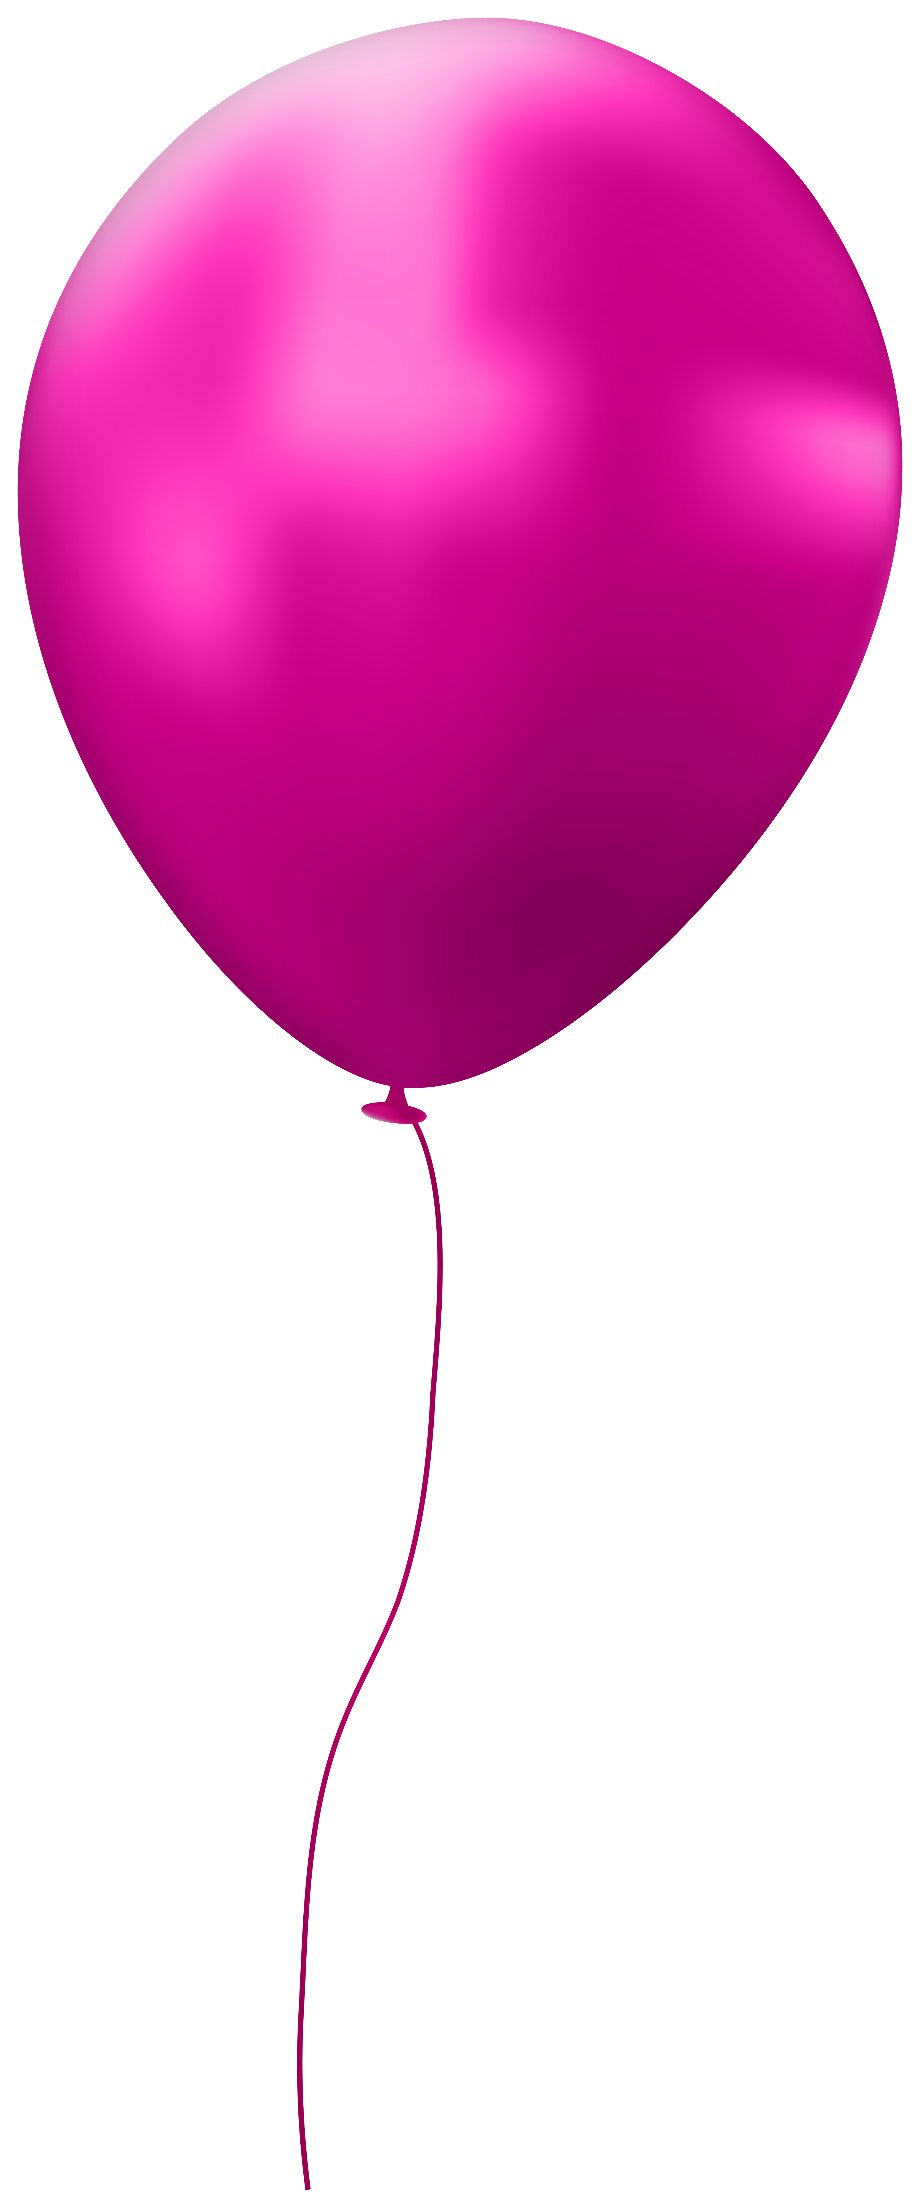 Download High Quality balloons clipart single Transparent PNG Images ...